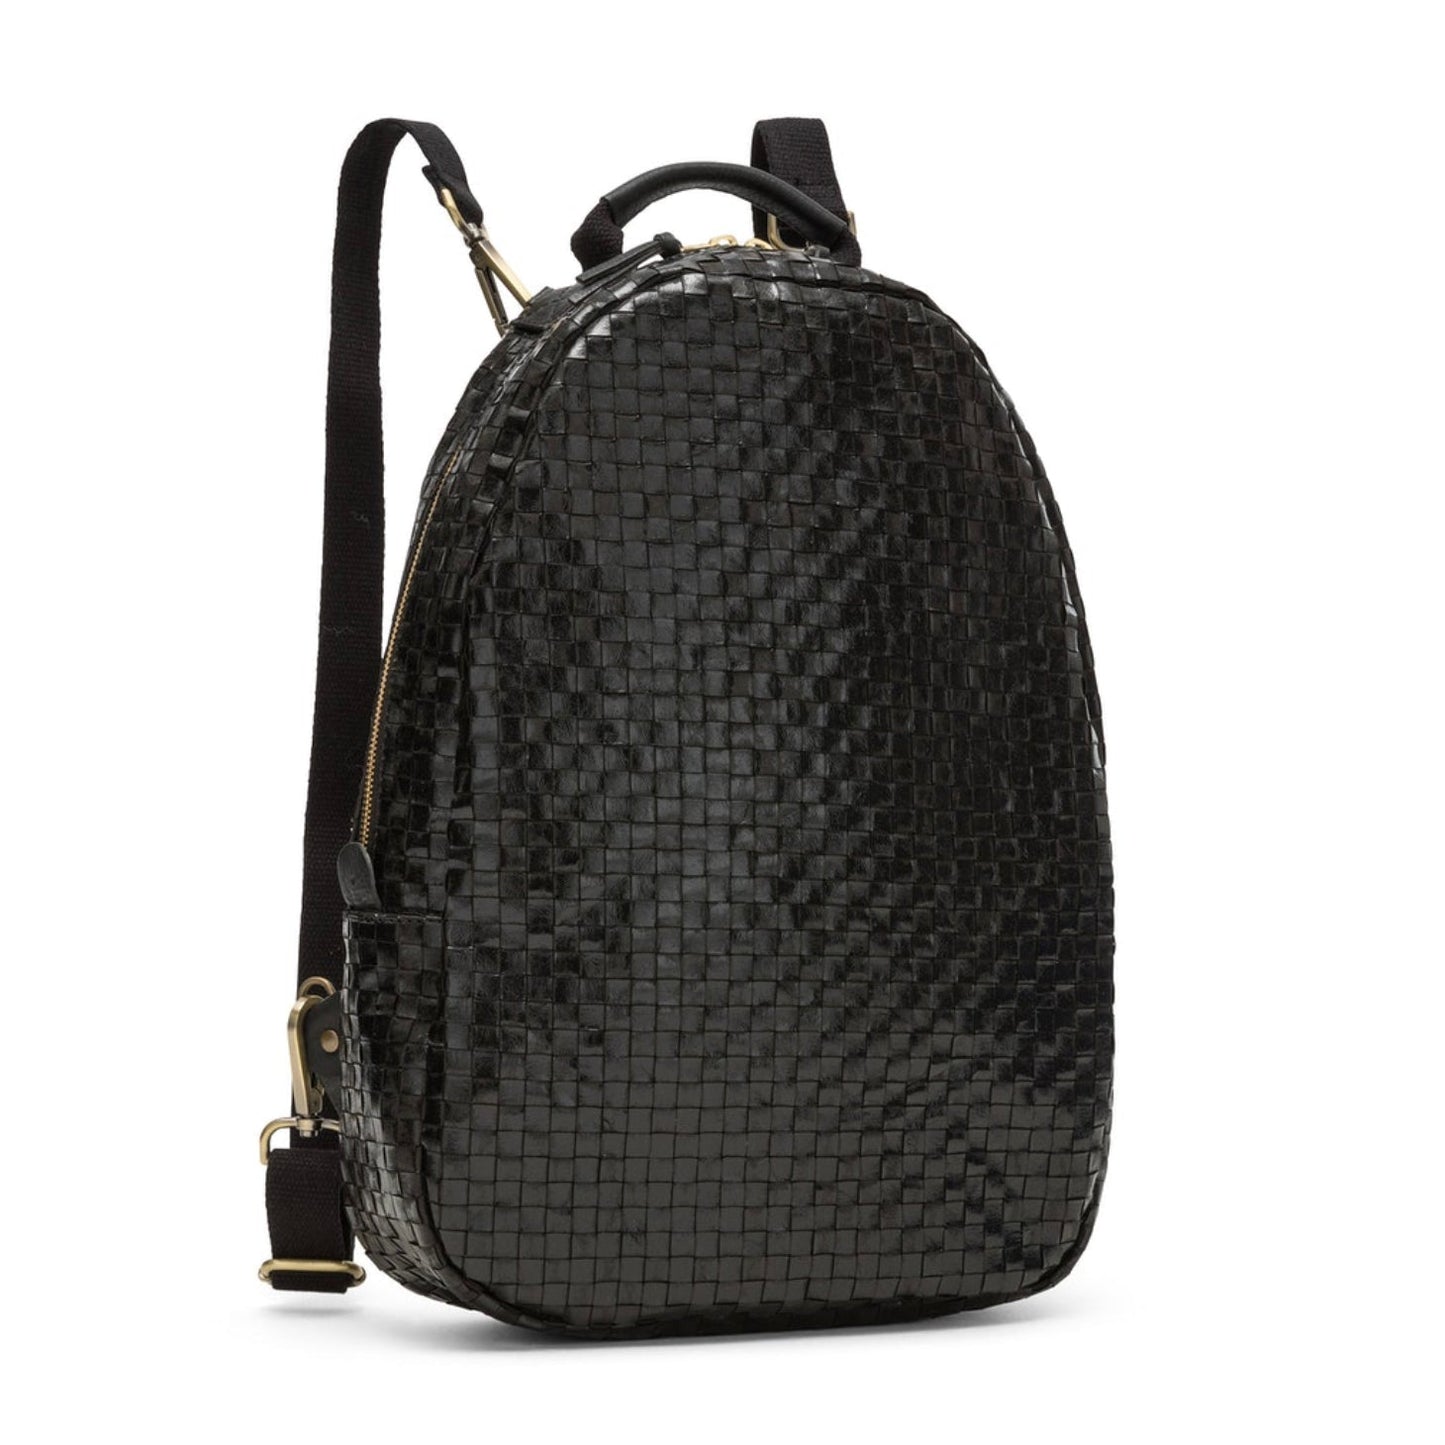 A woven washable paper backpack is shown from a 3/4 angle. It is oval in shape and features two adjustable canvas straps and a top handle. It is black in colour.